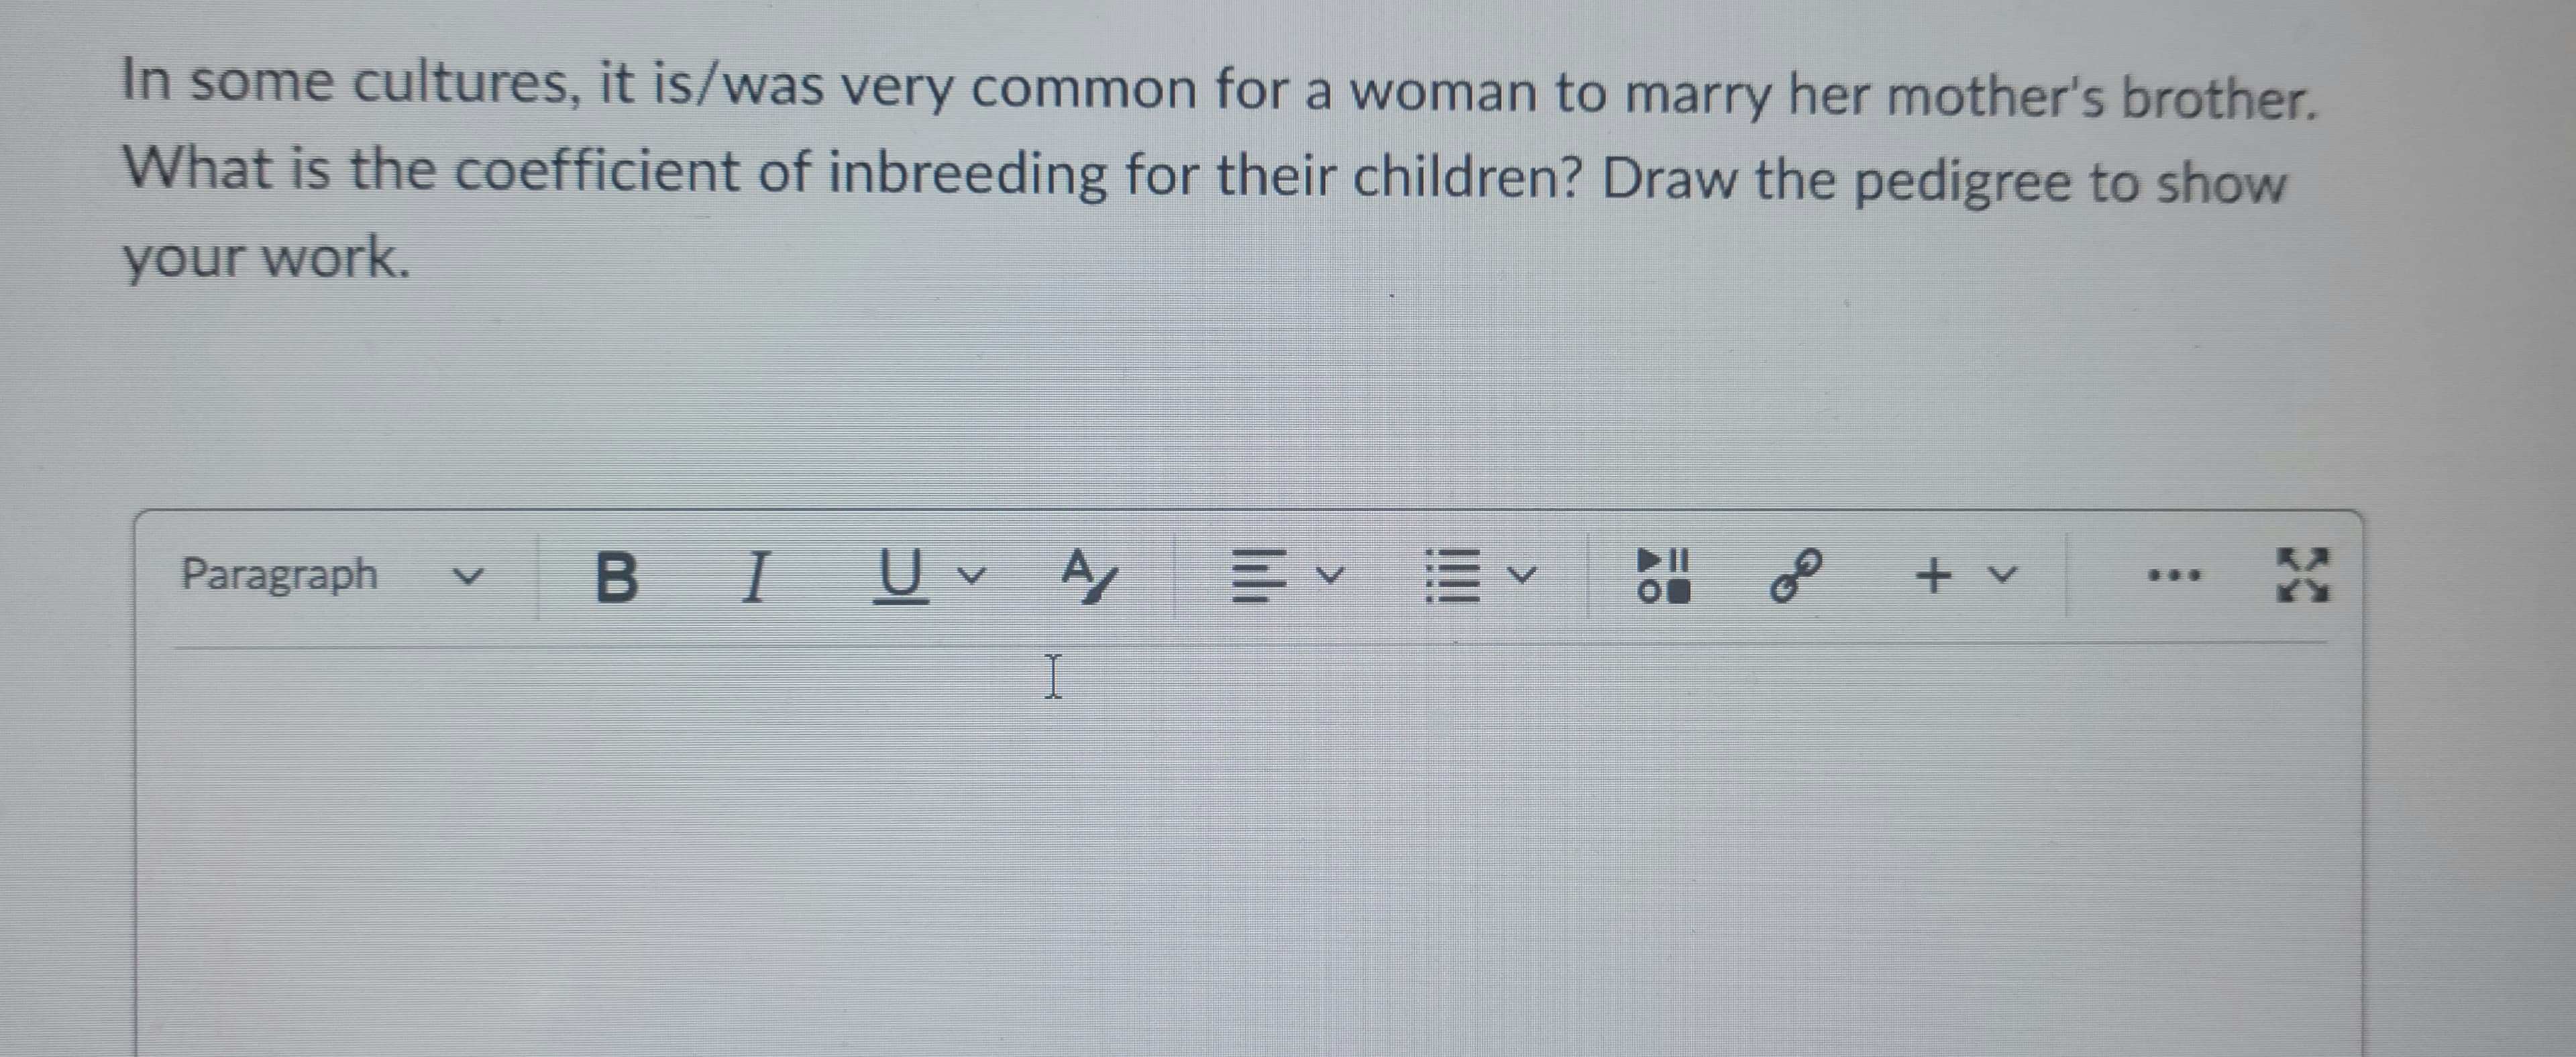 In some cultures, it is/was very common for a woman to marry her mother's brother.
What is the coefficient of inbreeding for their children? Draw the pedigree to show
your work.
Paragraph
B I U✓ A = ✓ ✓ On
I
G€
+ v
X